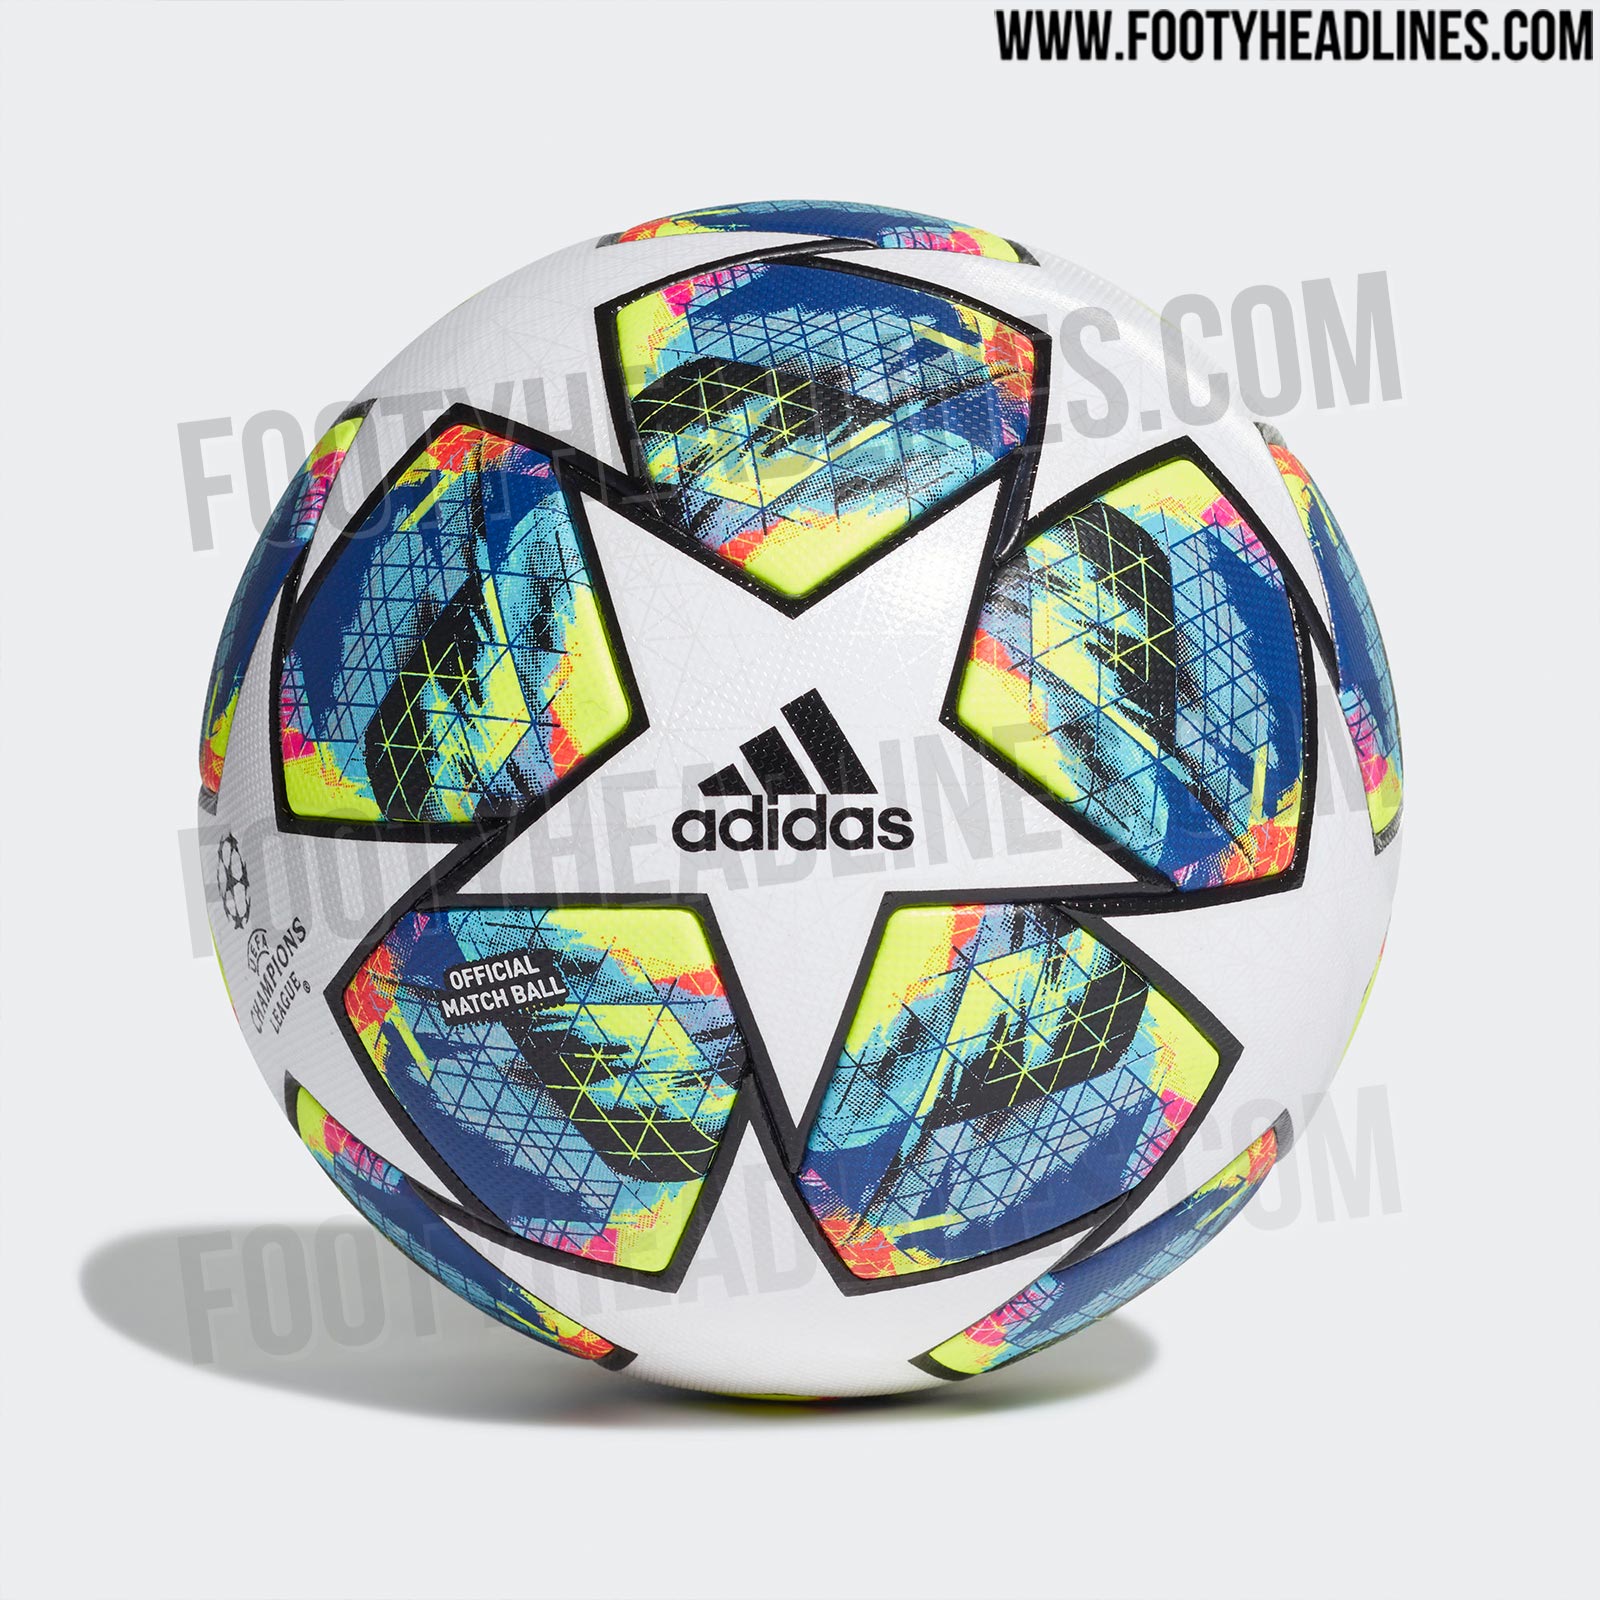 ucl new ball